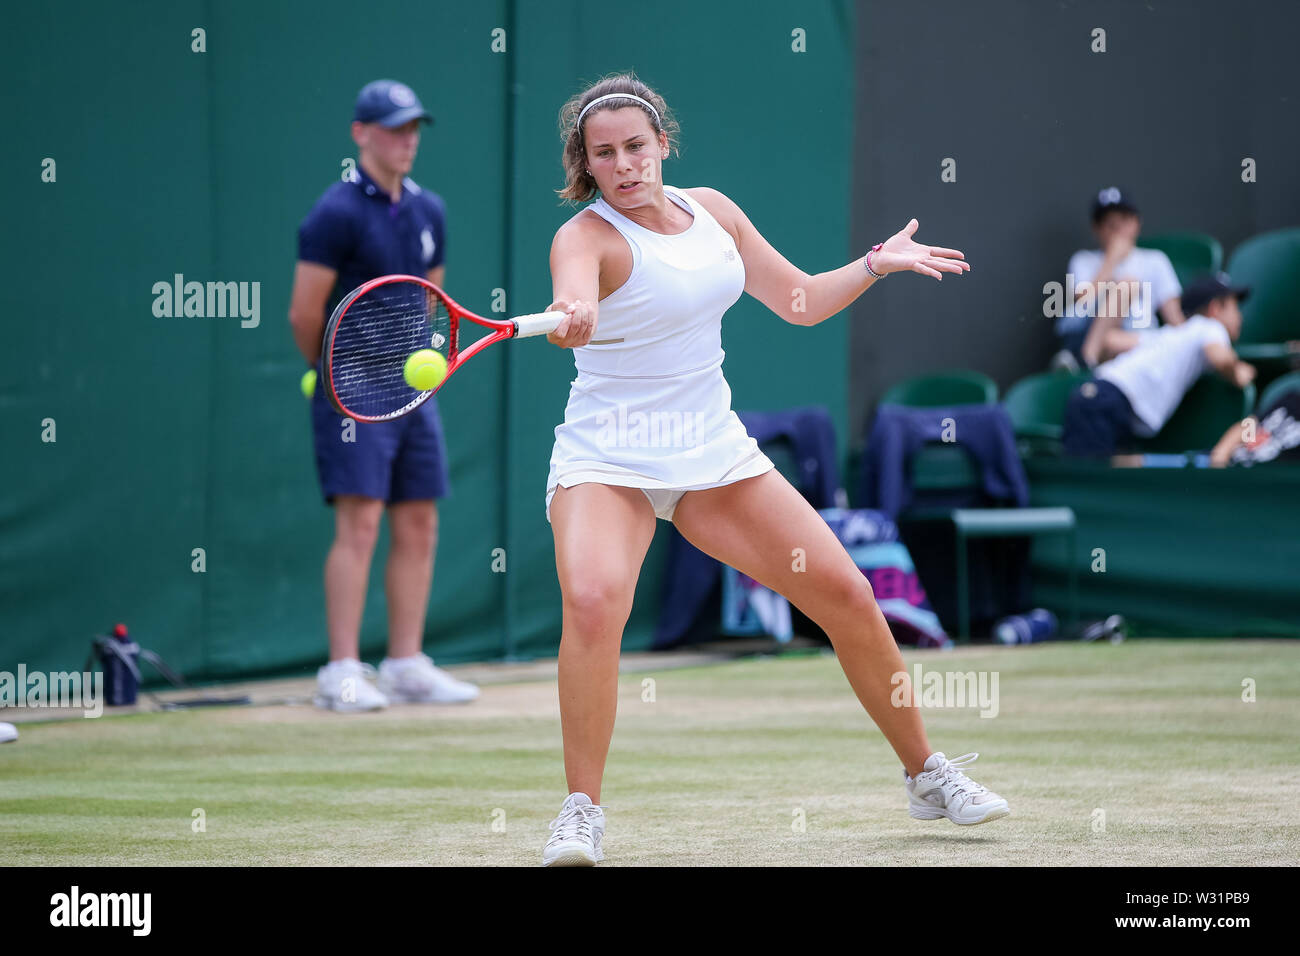 Wimbledon, London, UK. 11th July 2019. Emma Navarro of the United States  during the girl's singles quarter-final match of the Wimbledon Lawn Tennis  Championships against Natsumi Kawaguchi of Japan at the All